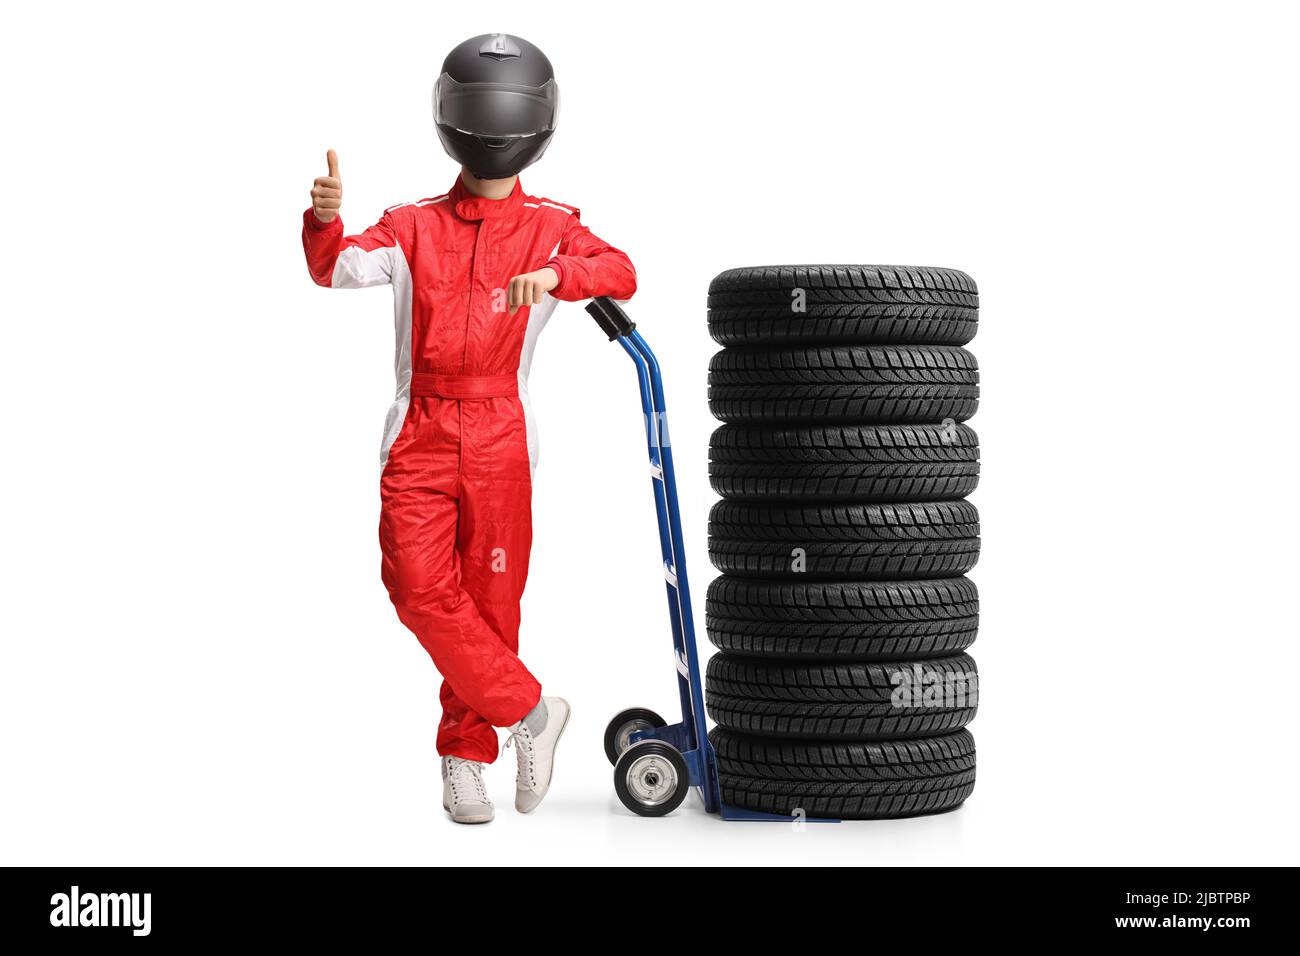 Full length portrait of a racer with a helmet leaning on a hand truck with tires and gesturing thumbs up isolated on white background Stock Photo